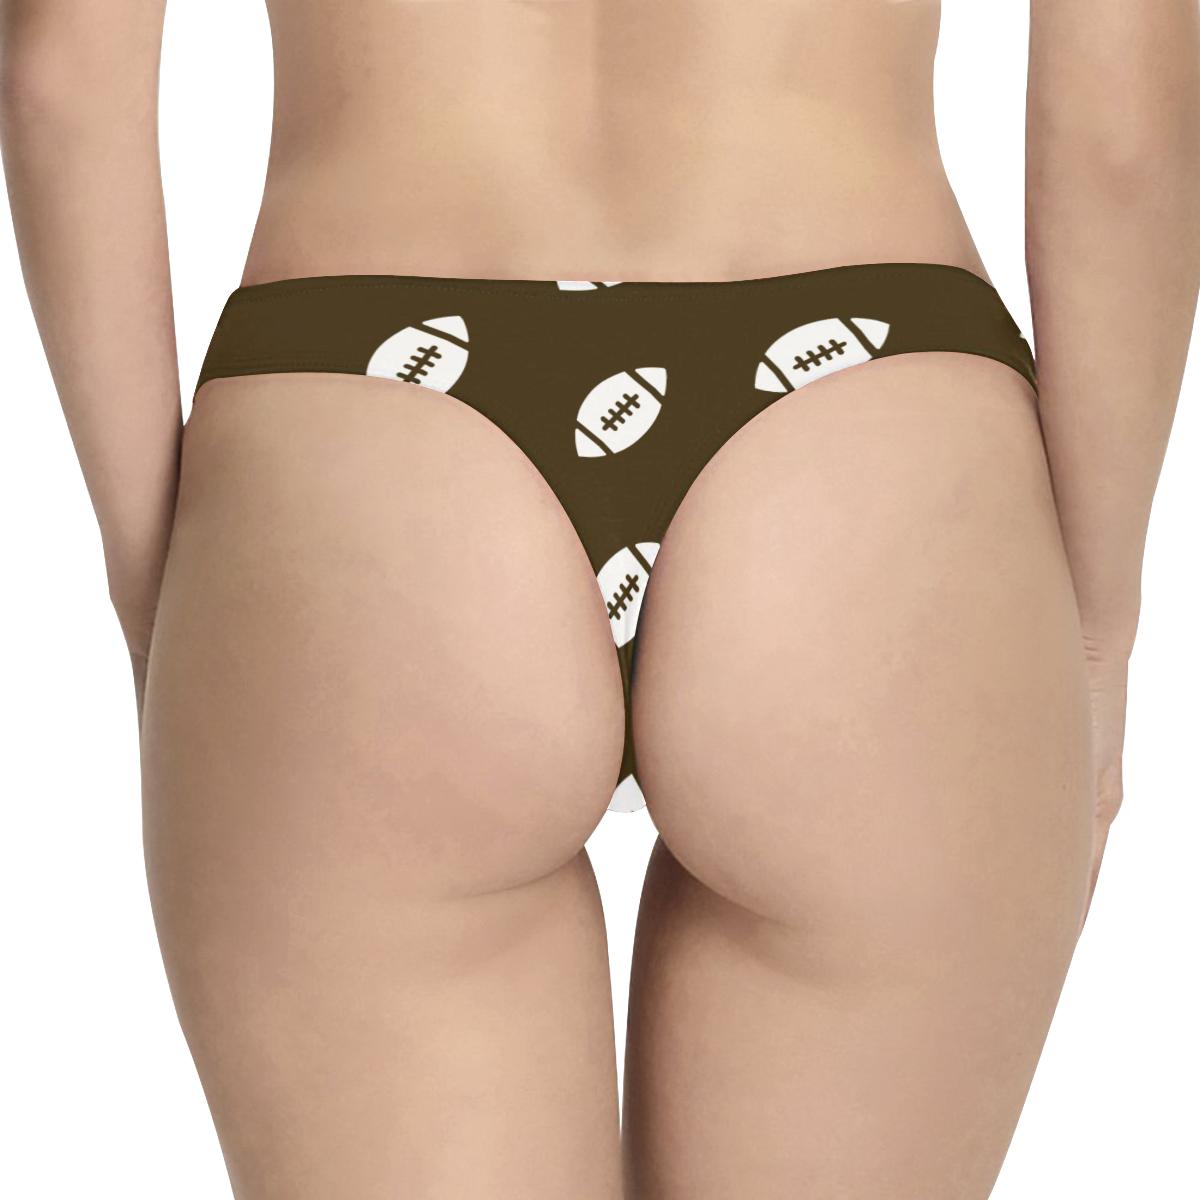 Cleveland Browns Women’s Classic Thong – Model L5